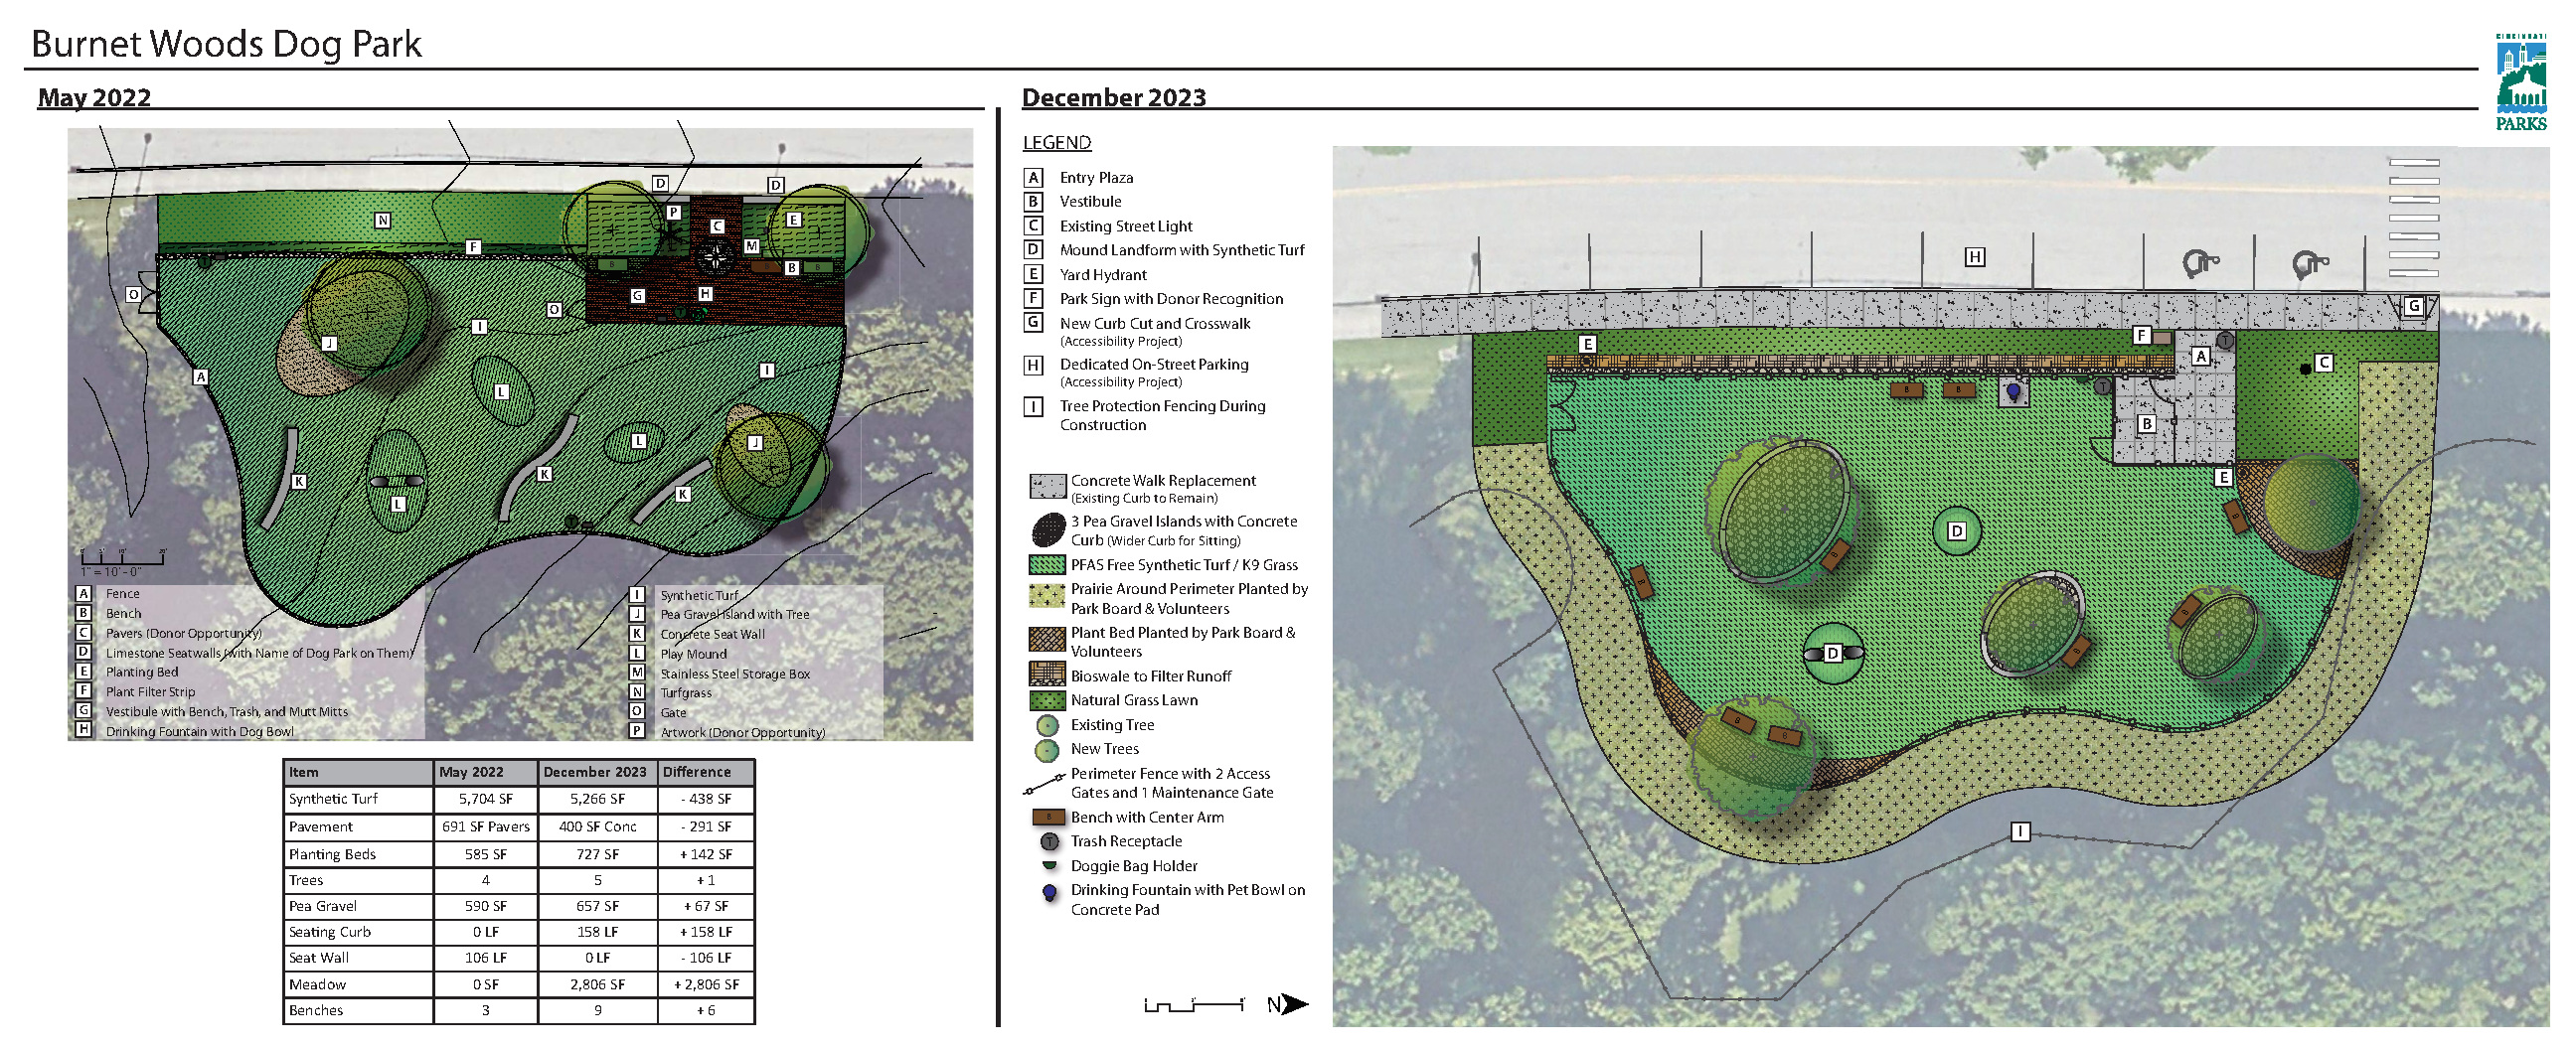 A rendering of the layout of the Burnet Woods Dog Park